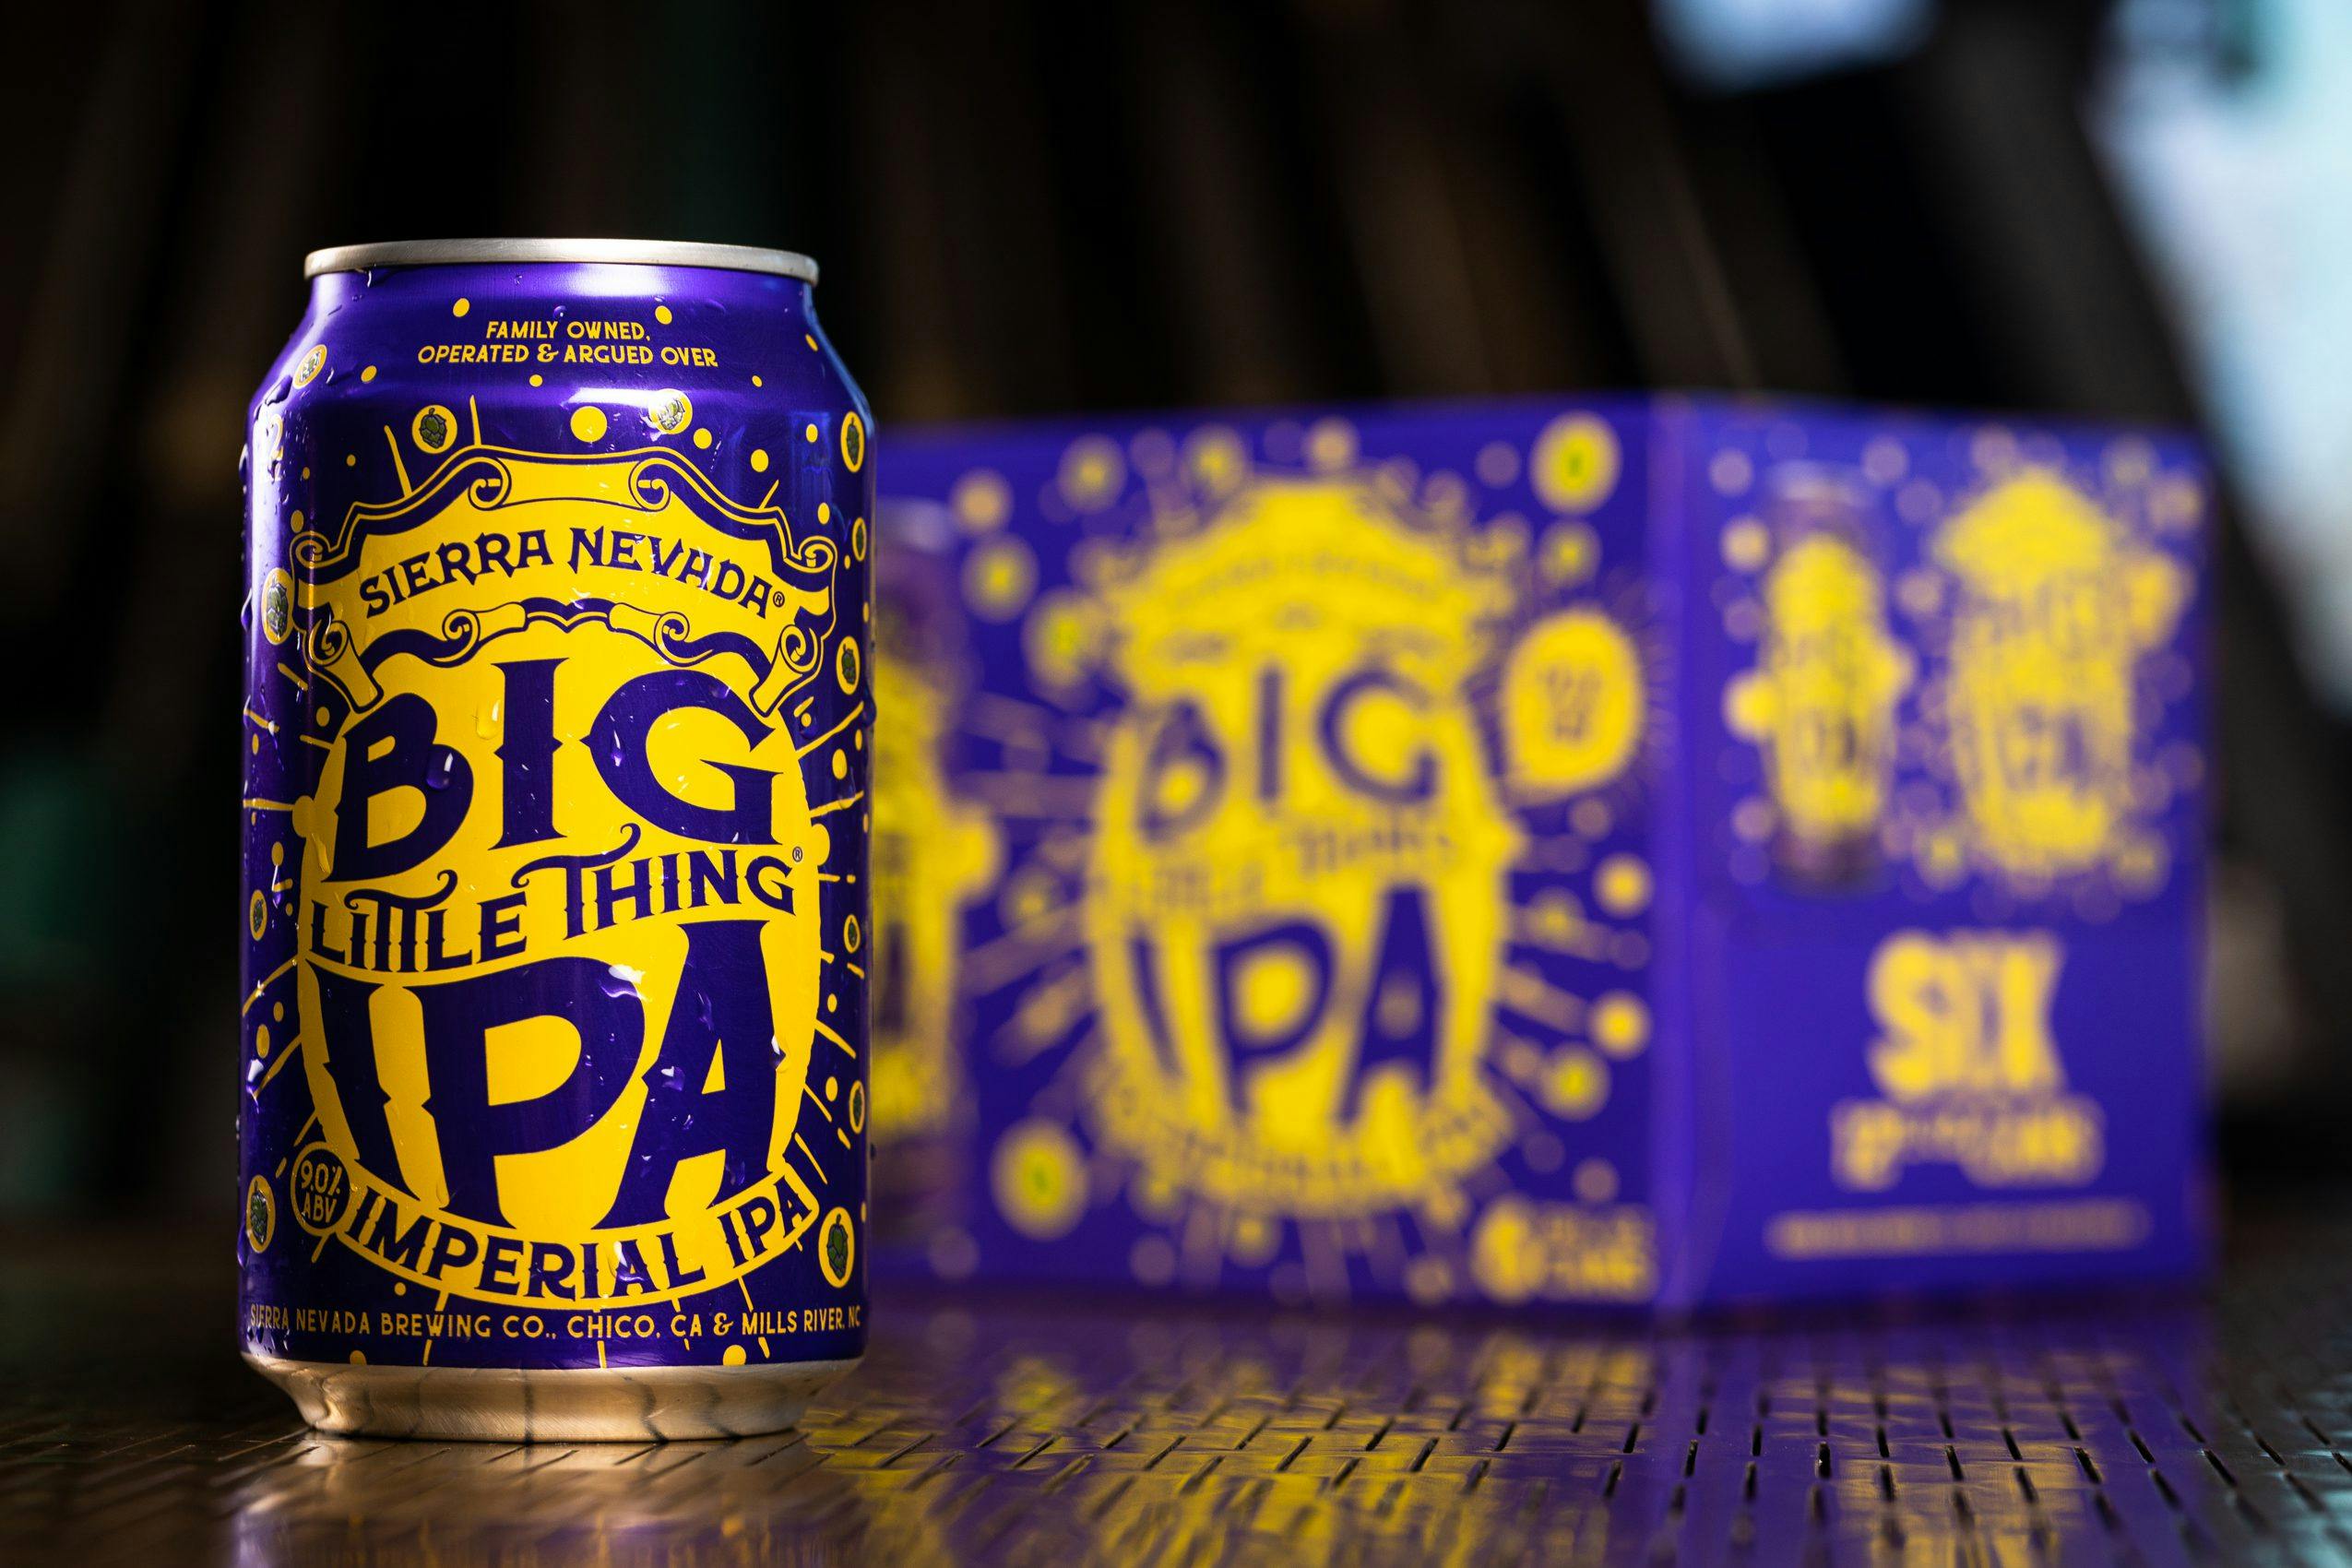 Three cans of Big Little Thing beer on a table